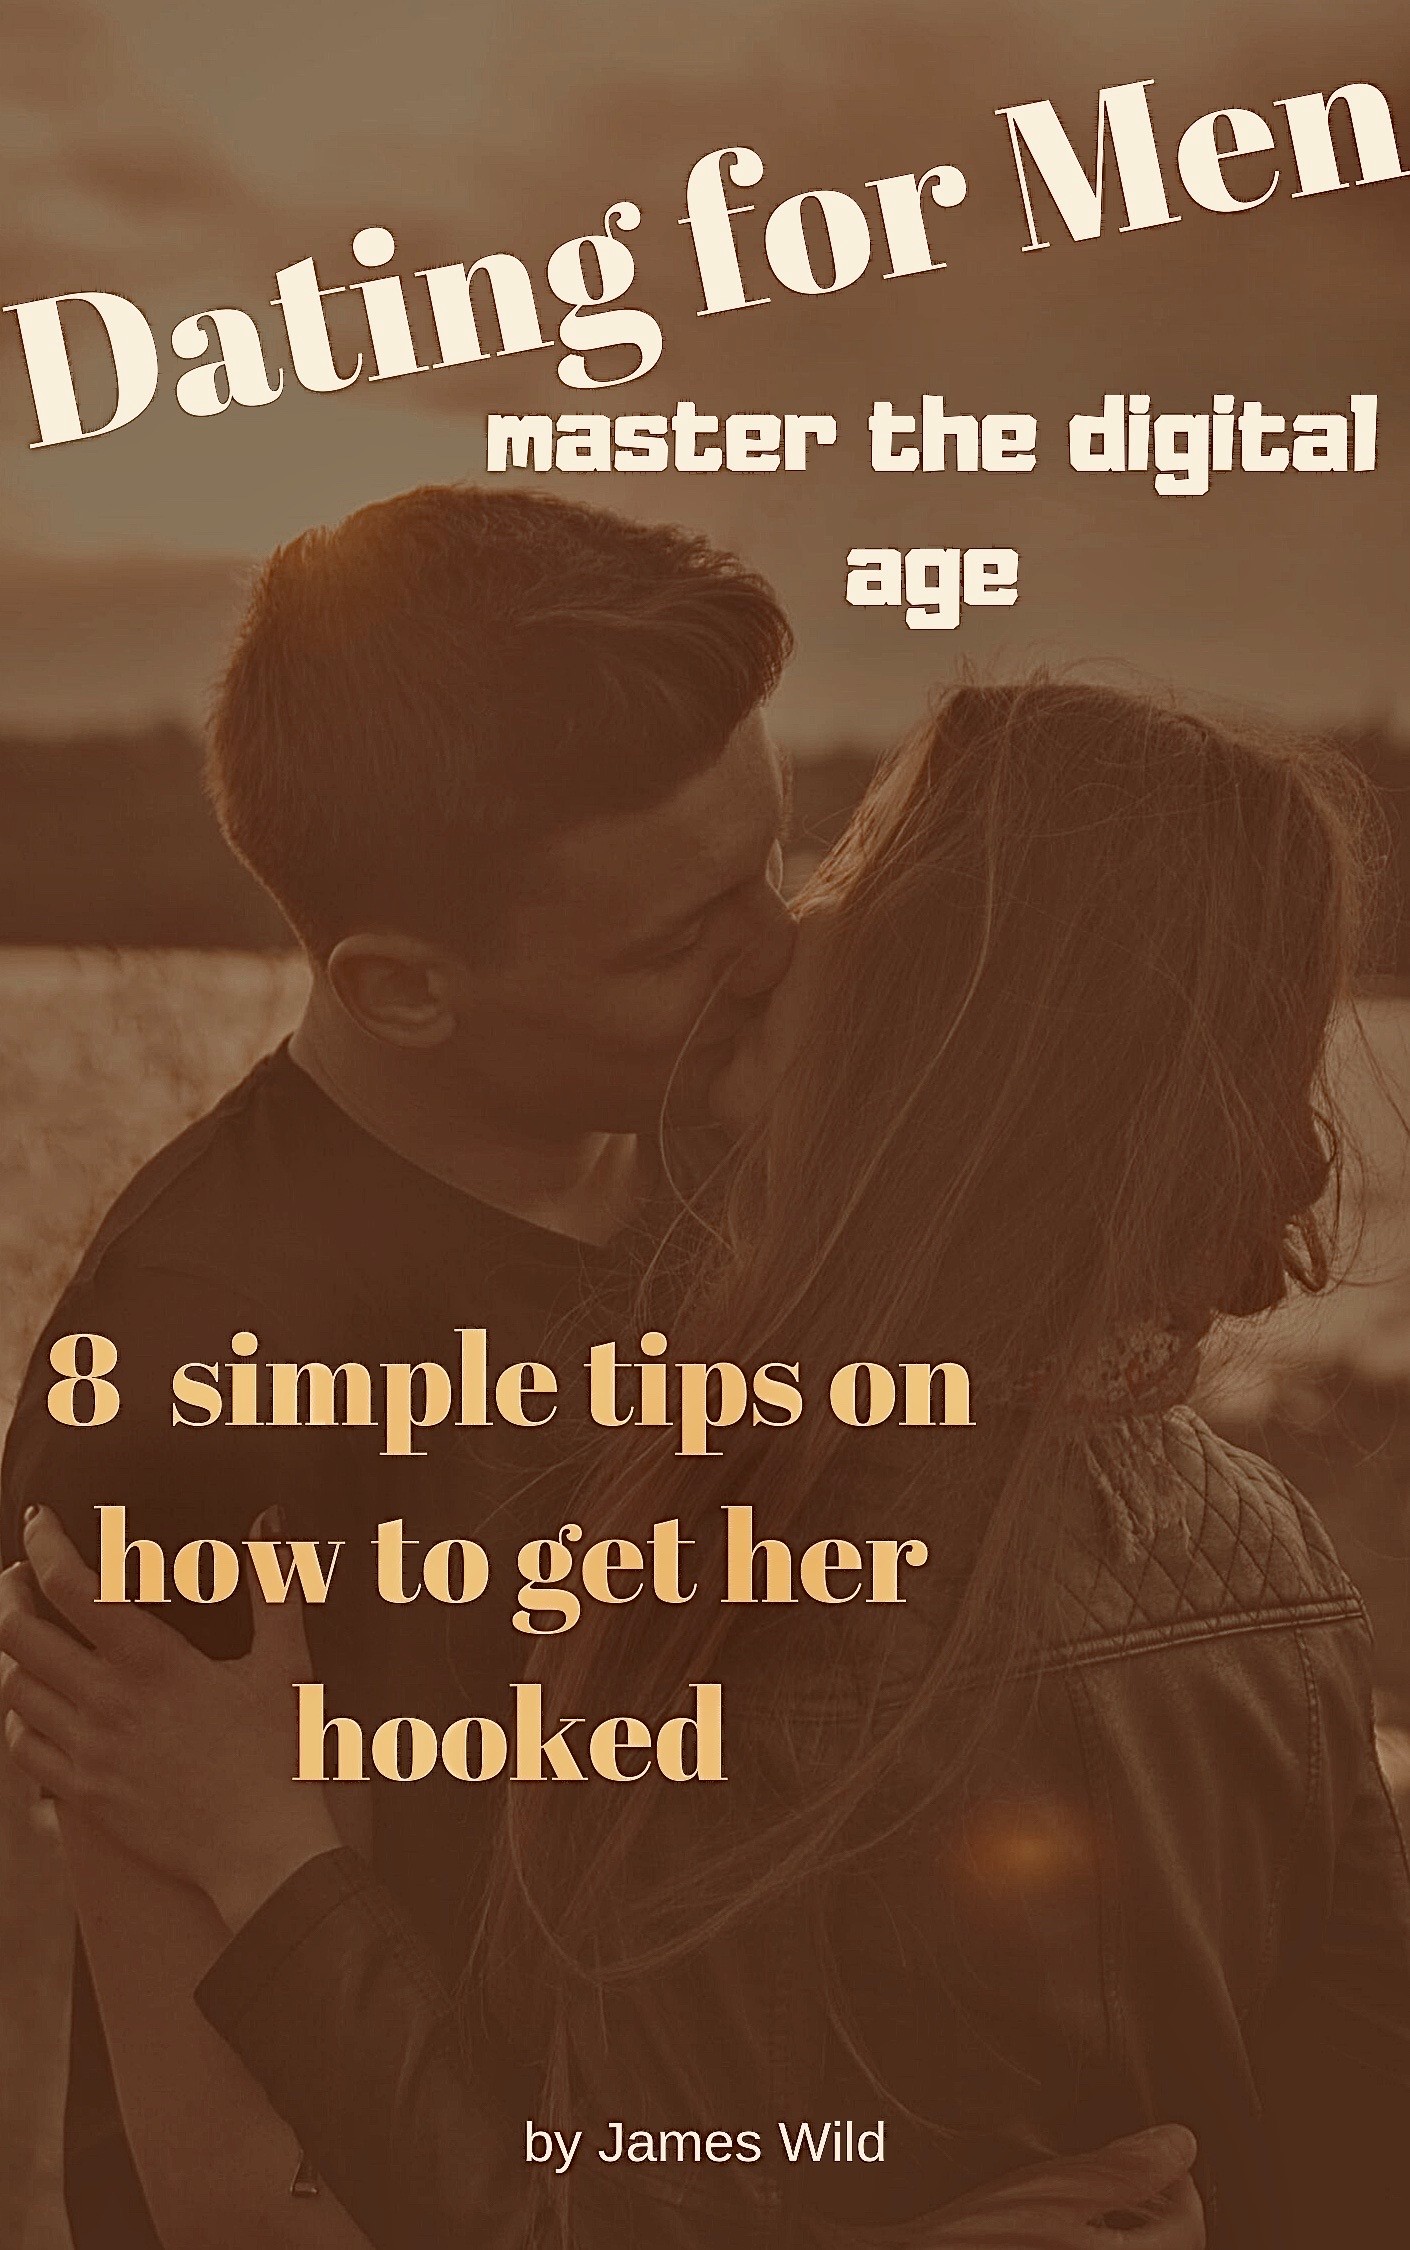 FREE: Dating For Men master the digital age: 8 simple tips on how to get her hooked by James Wild